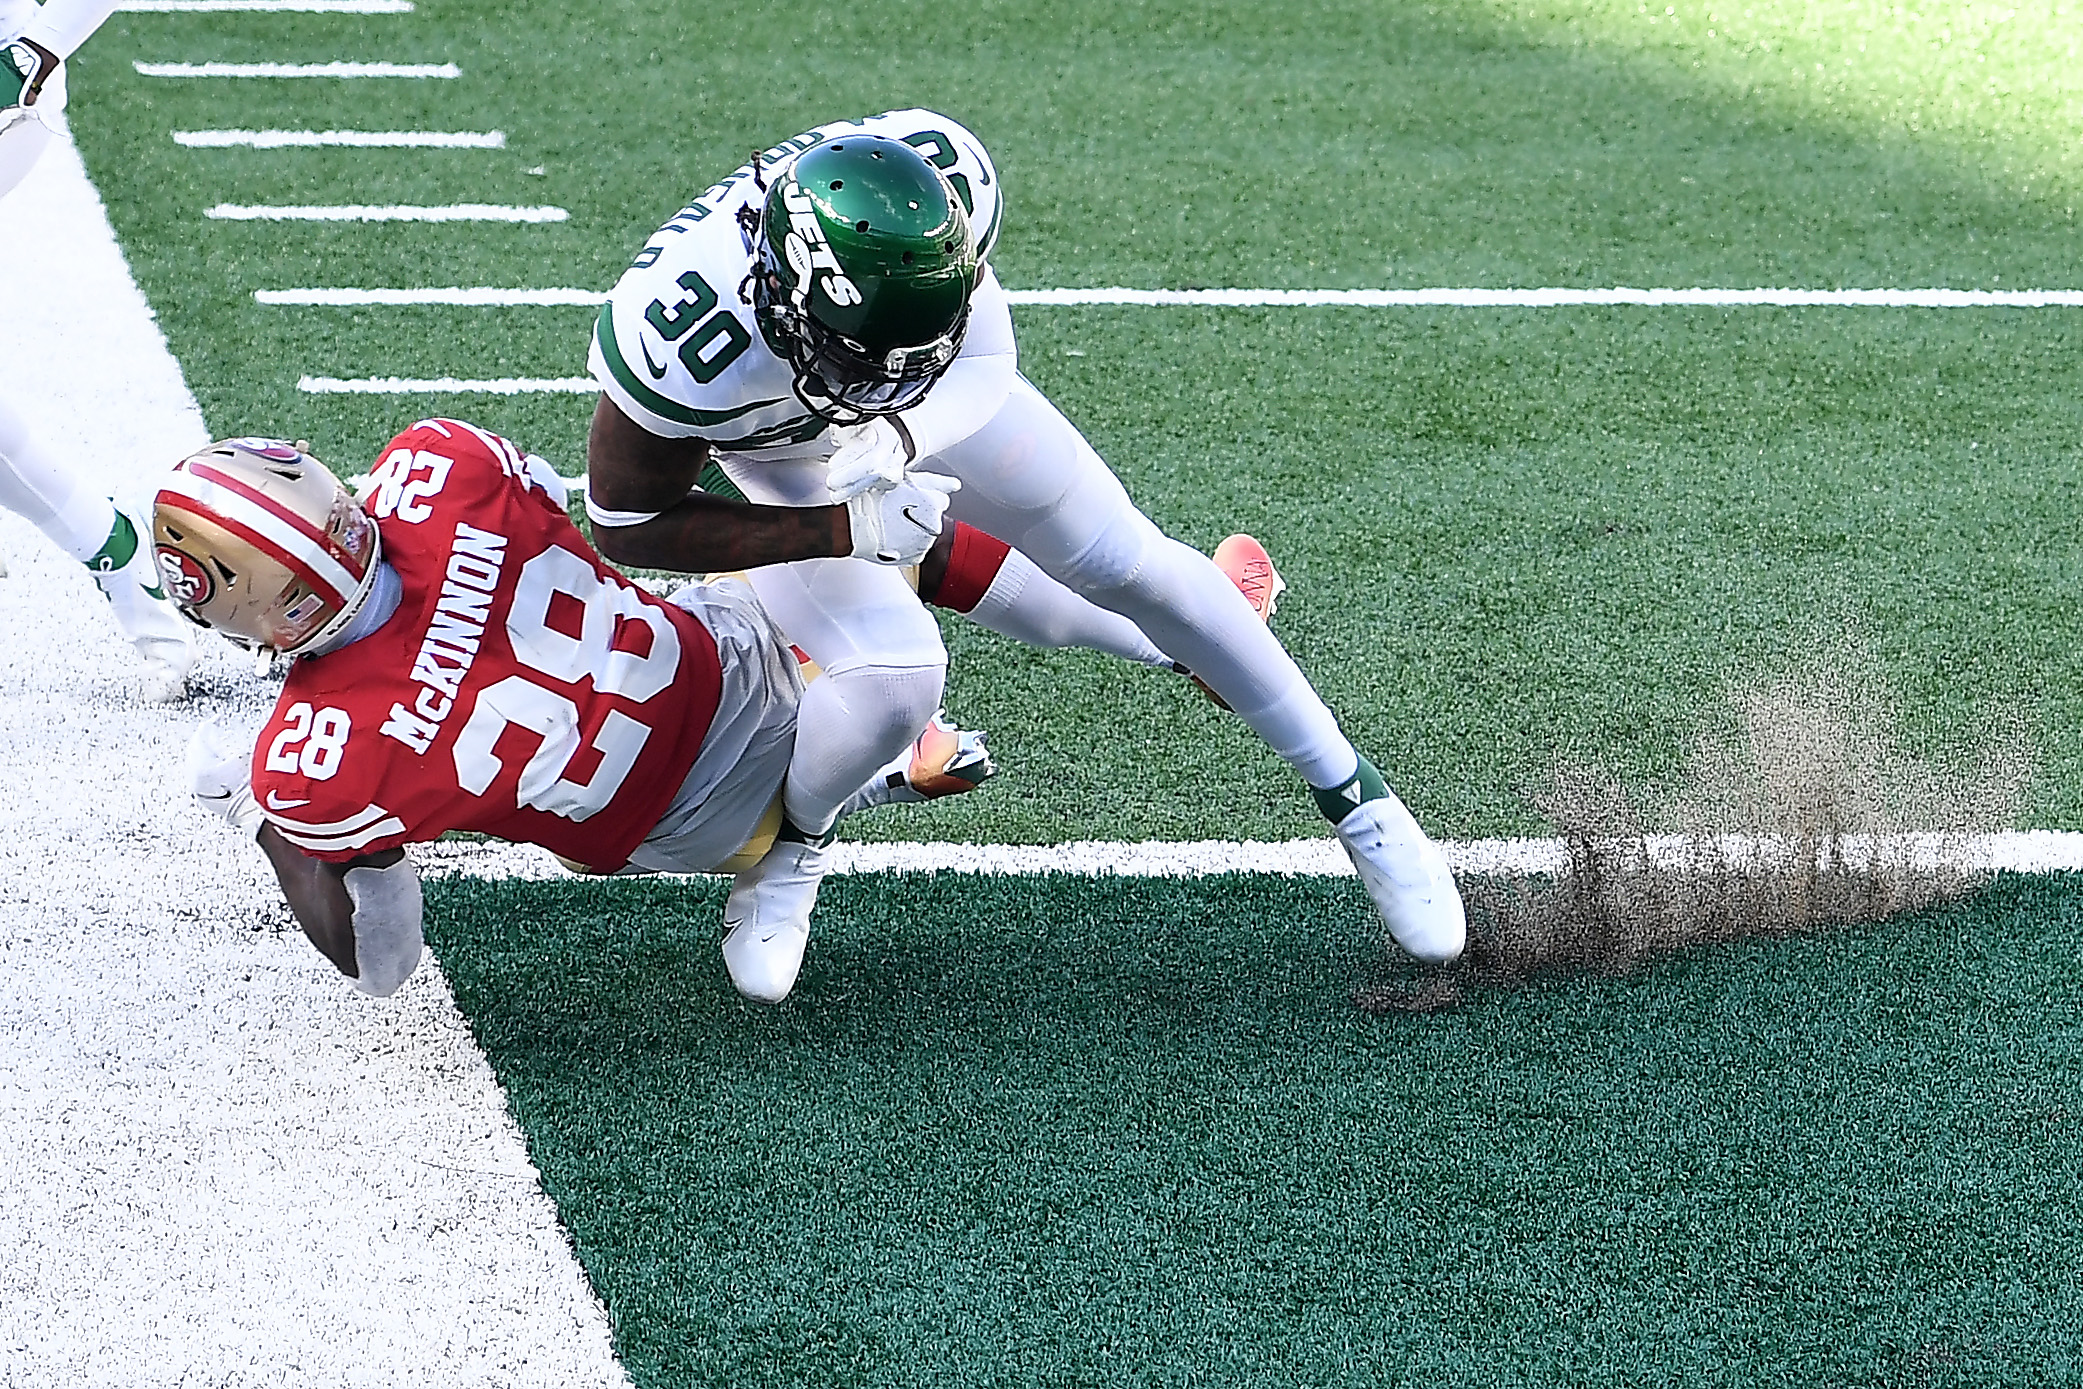 EAST RUTHERFORD, NEW JERSEY - SEPTEMBER 20: Jerick McKinnon #28 of the San Francisco 49ers scores a touchdown as Bradley McDougald #30 of the New York Jets defends during the second half at MetLife Stadium on September 20, 2020 in East Rutherford, New Jersey. (Photo by Sarah Stier/Getty Images)